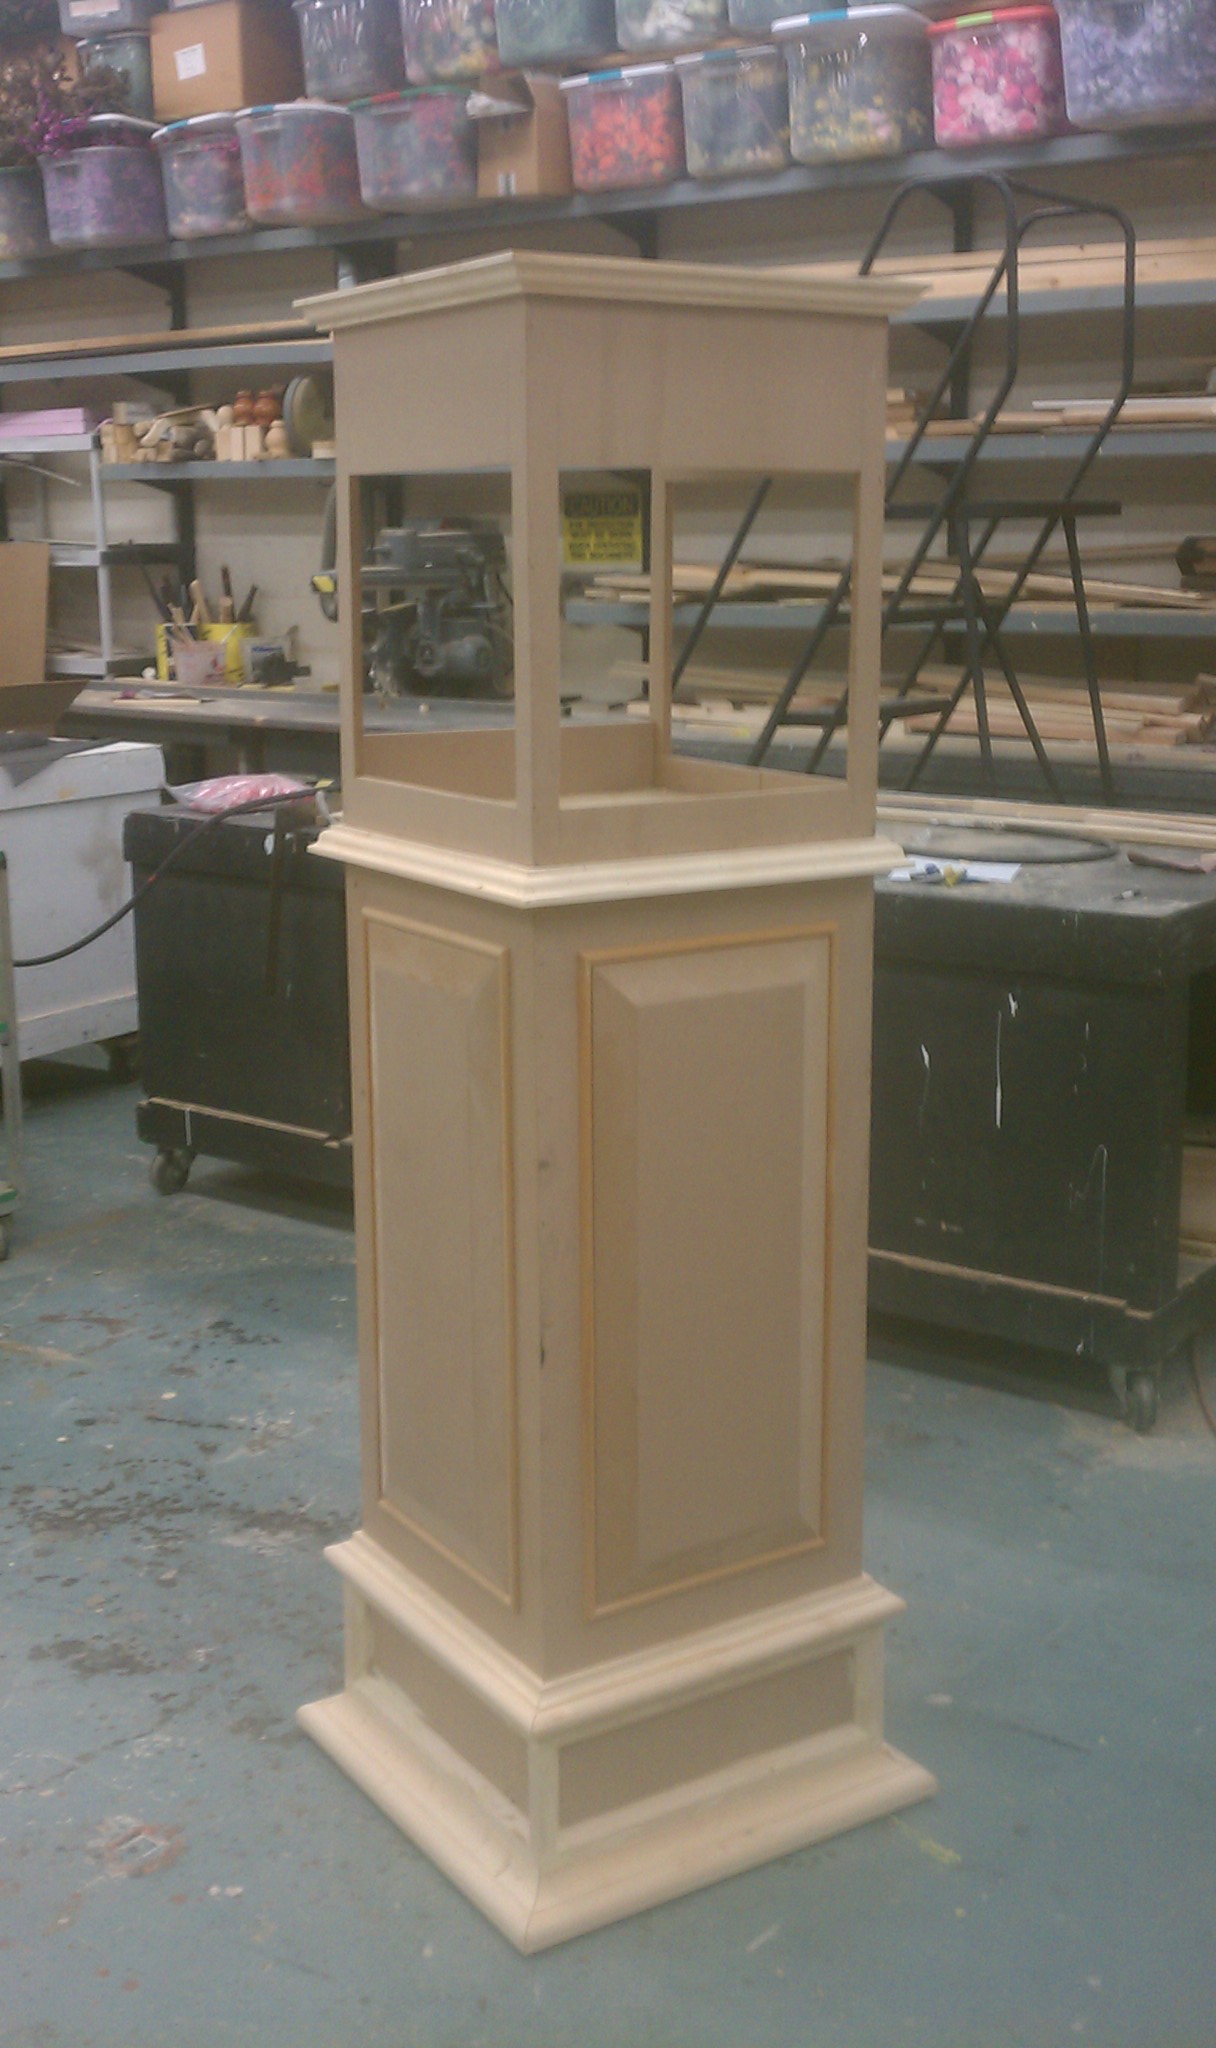 The base of the clock during assembly. All the molding was made for this clock except the 1/2 round.